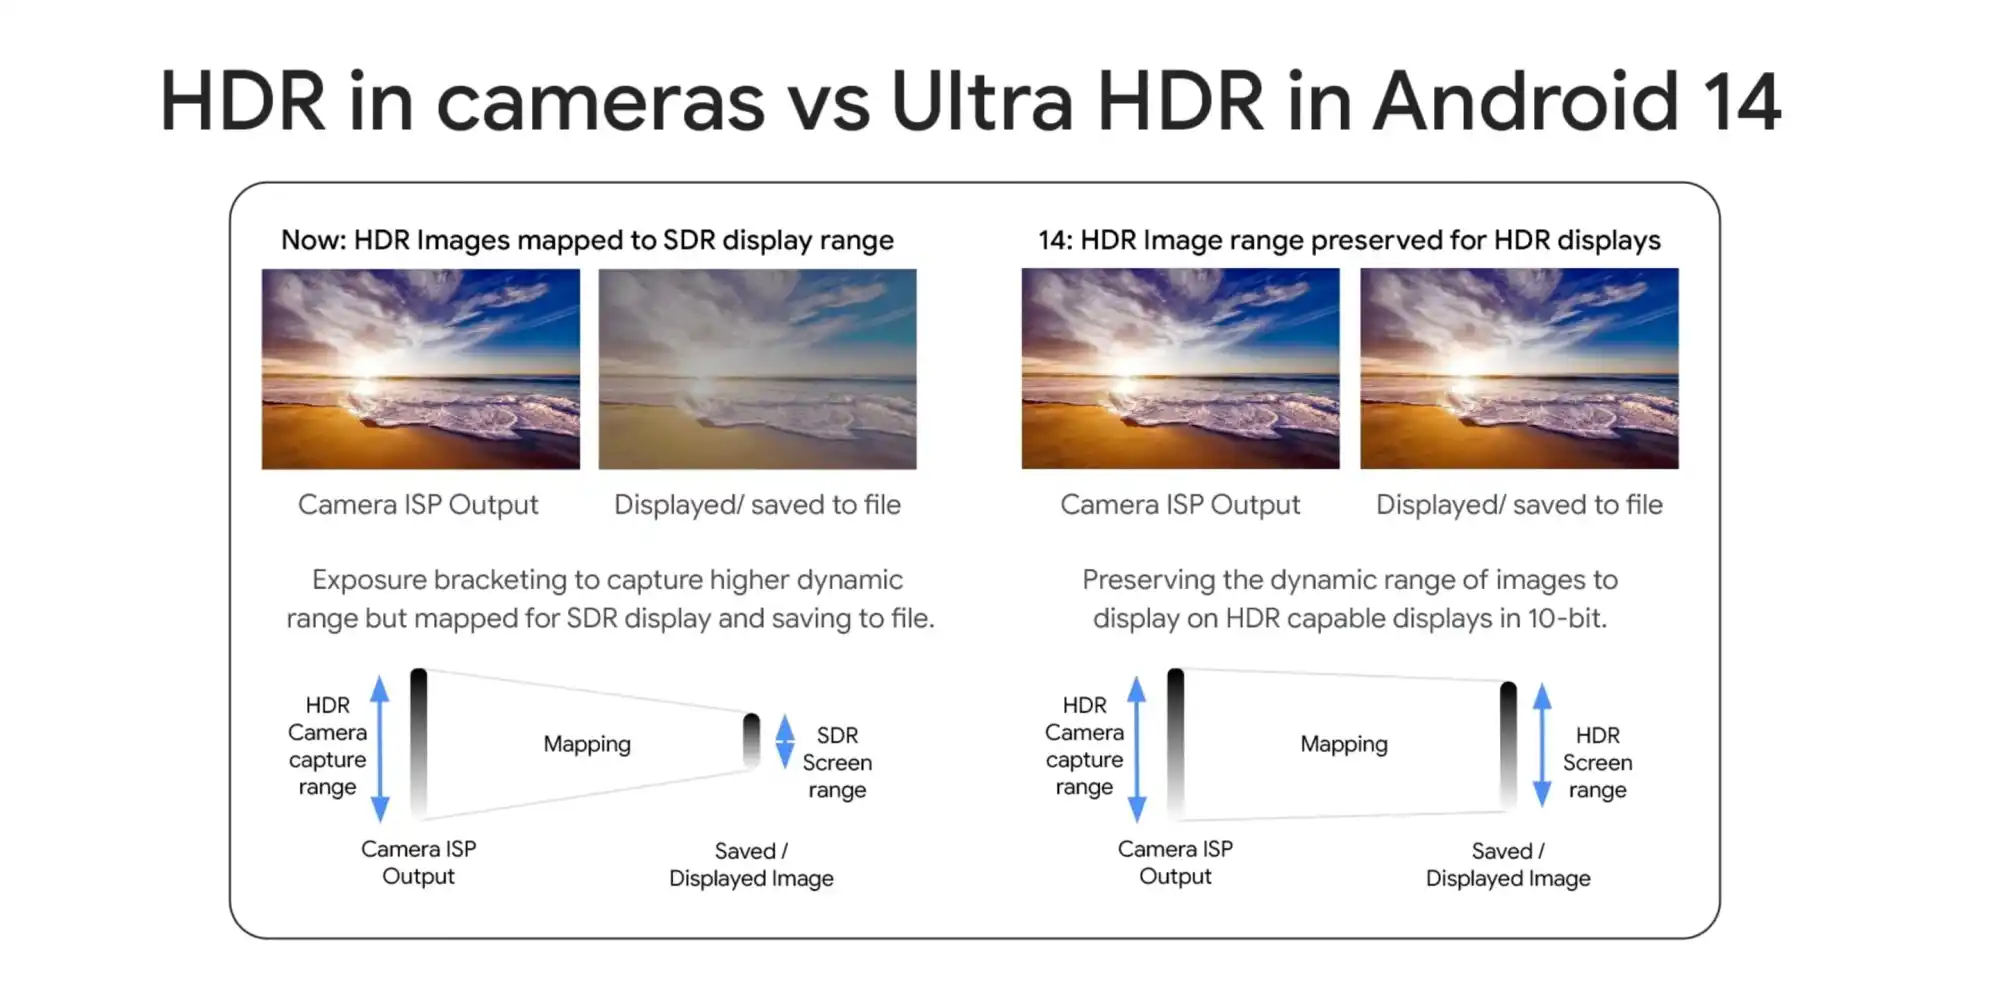 Ultra HDR